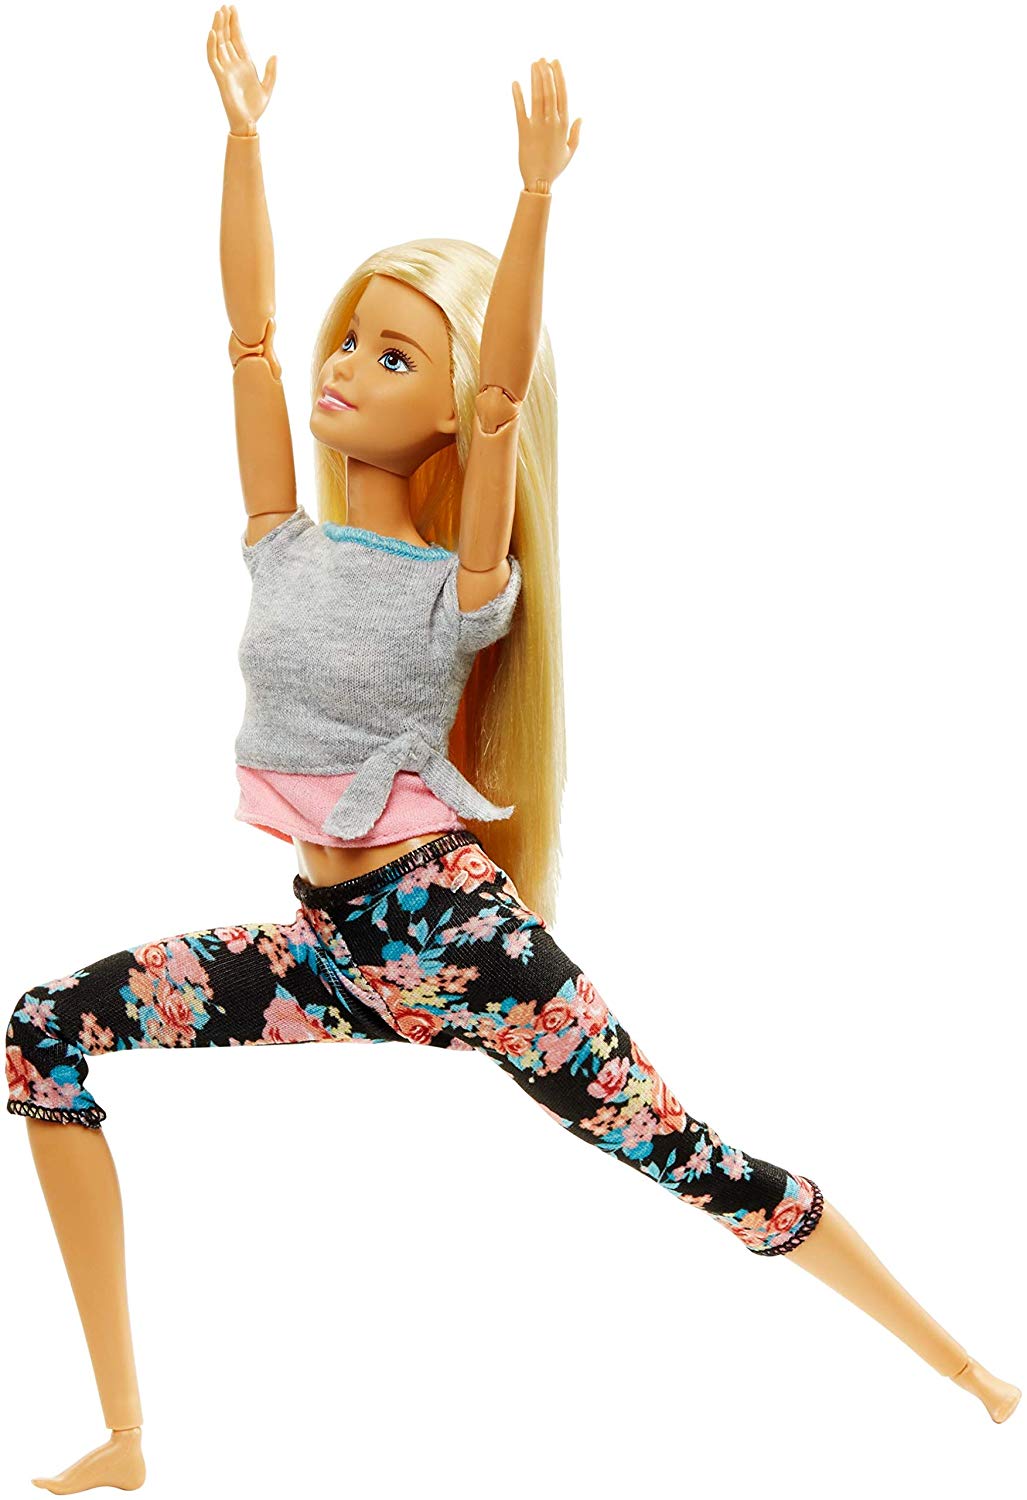 Doll Review: Barbie Made to Move 